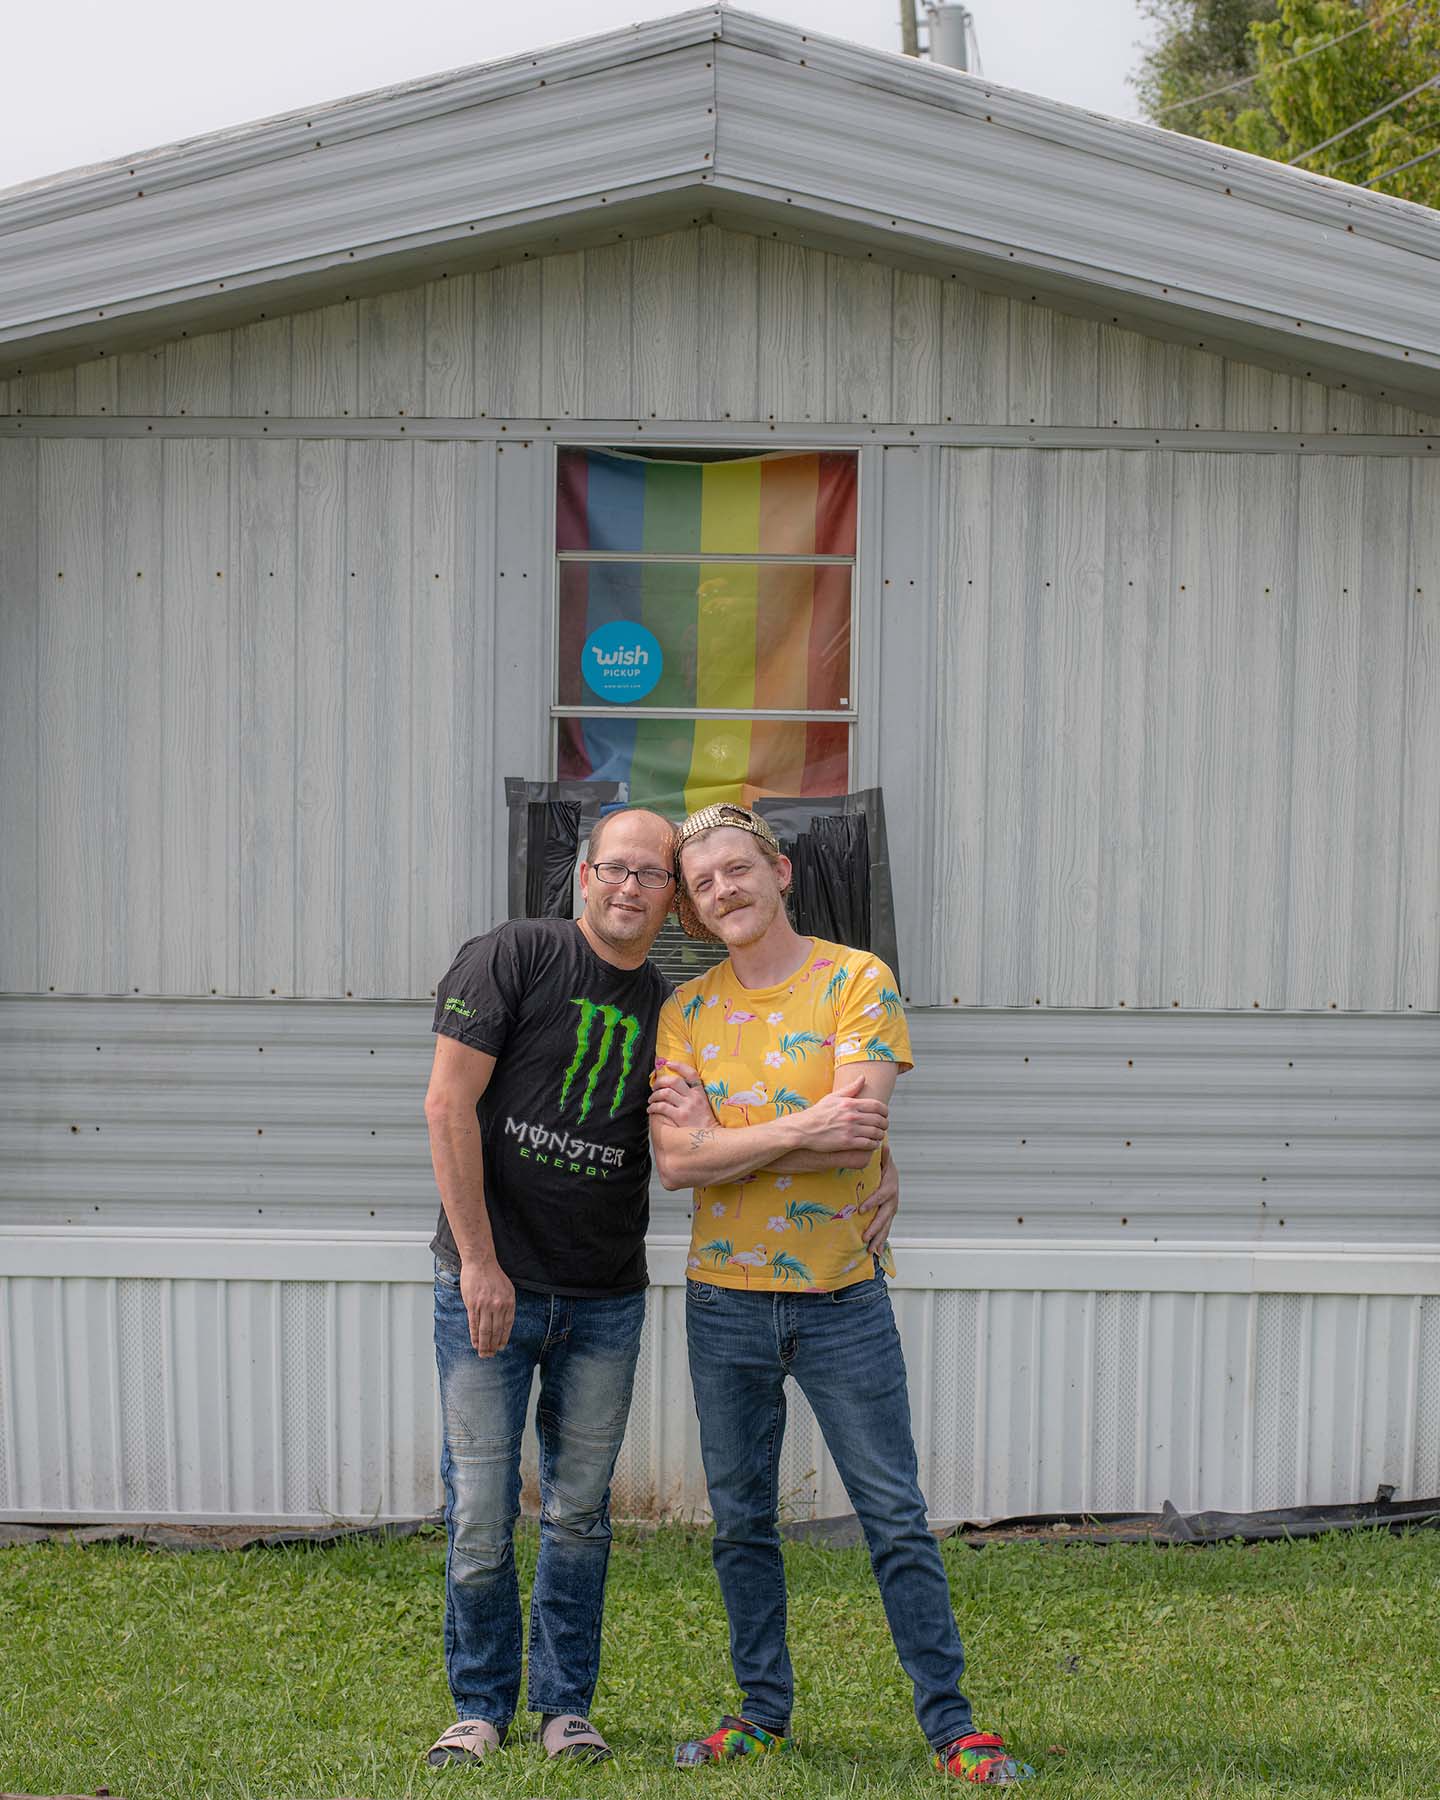 Jerry Martin and Rober Halland pose outside their residence which sports a pride flag